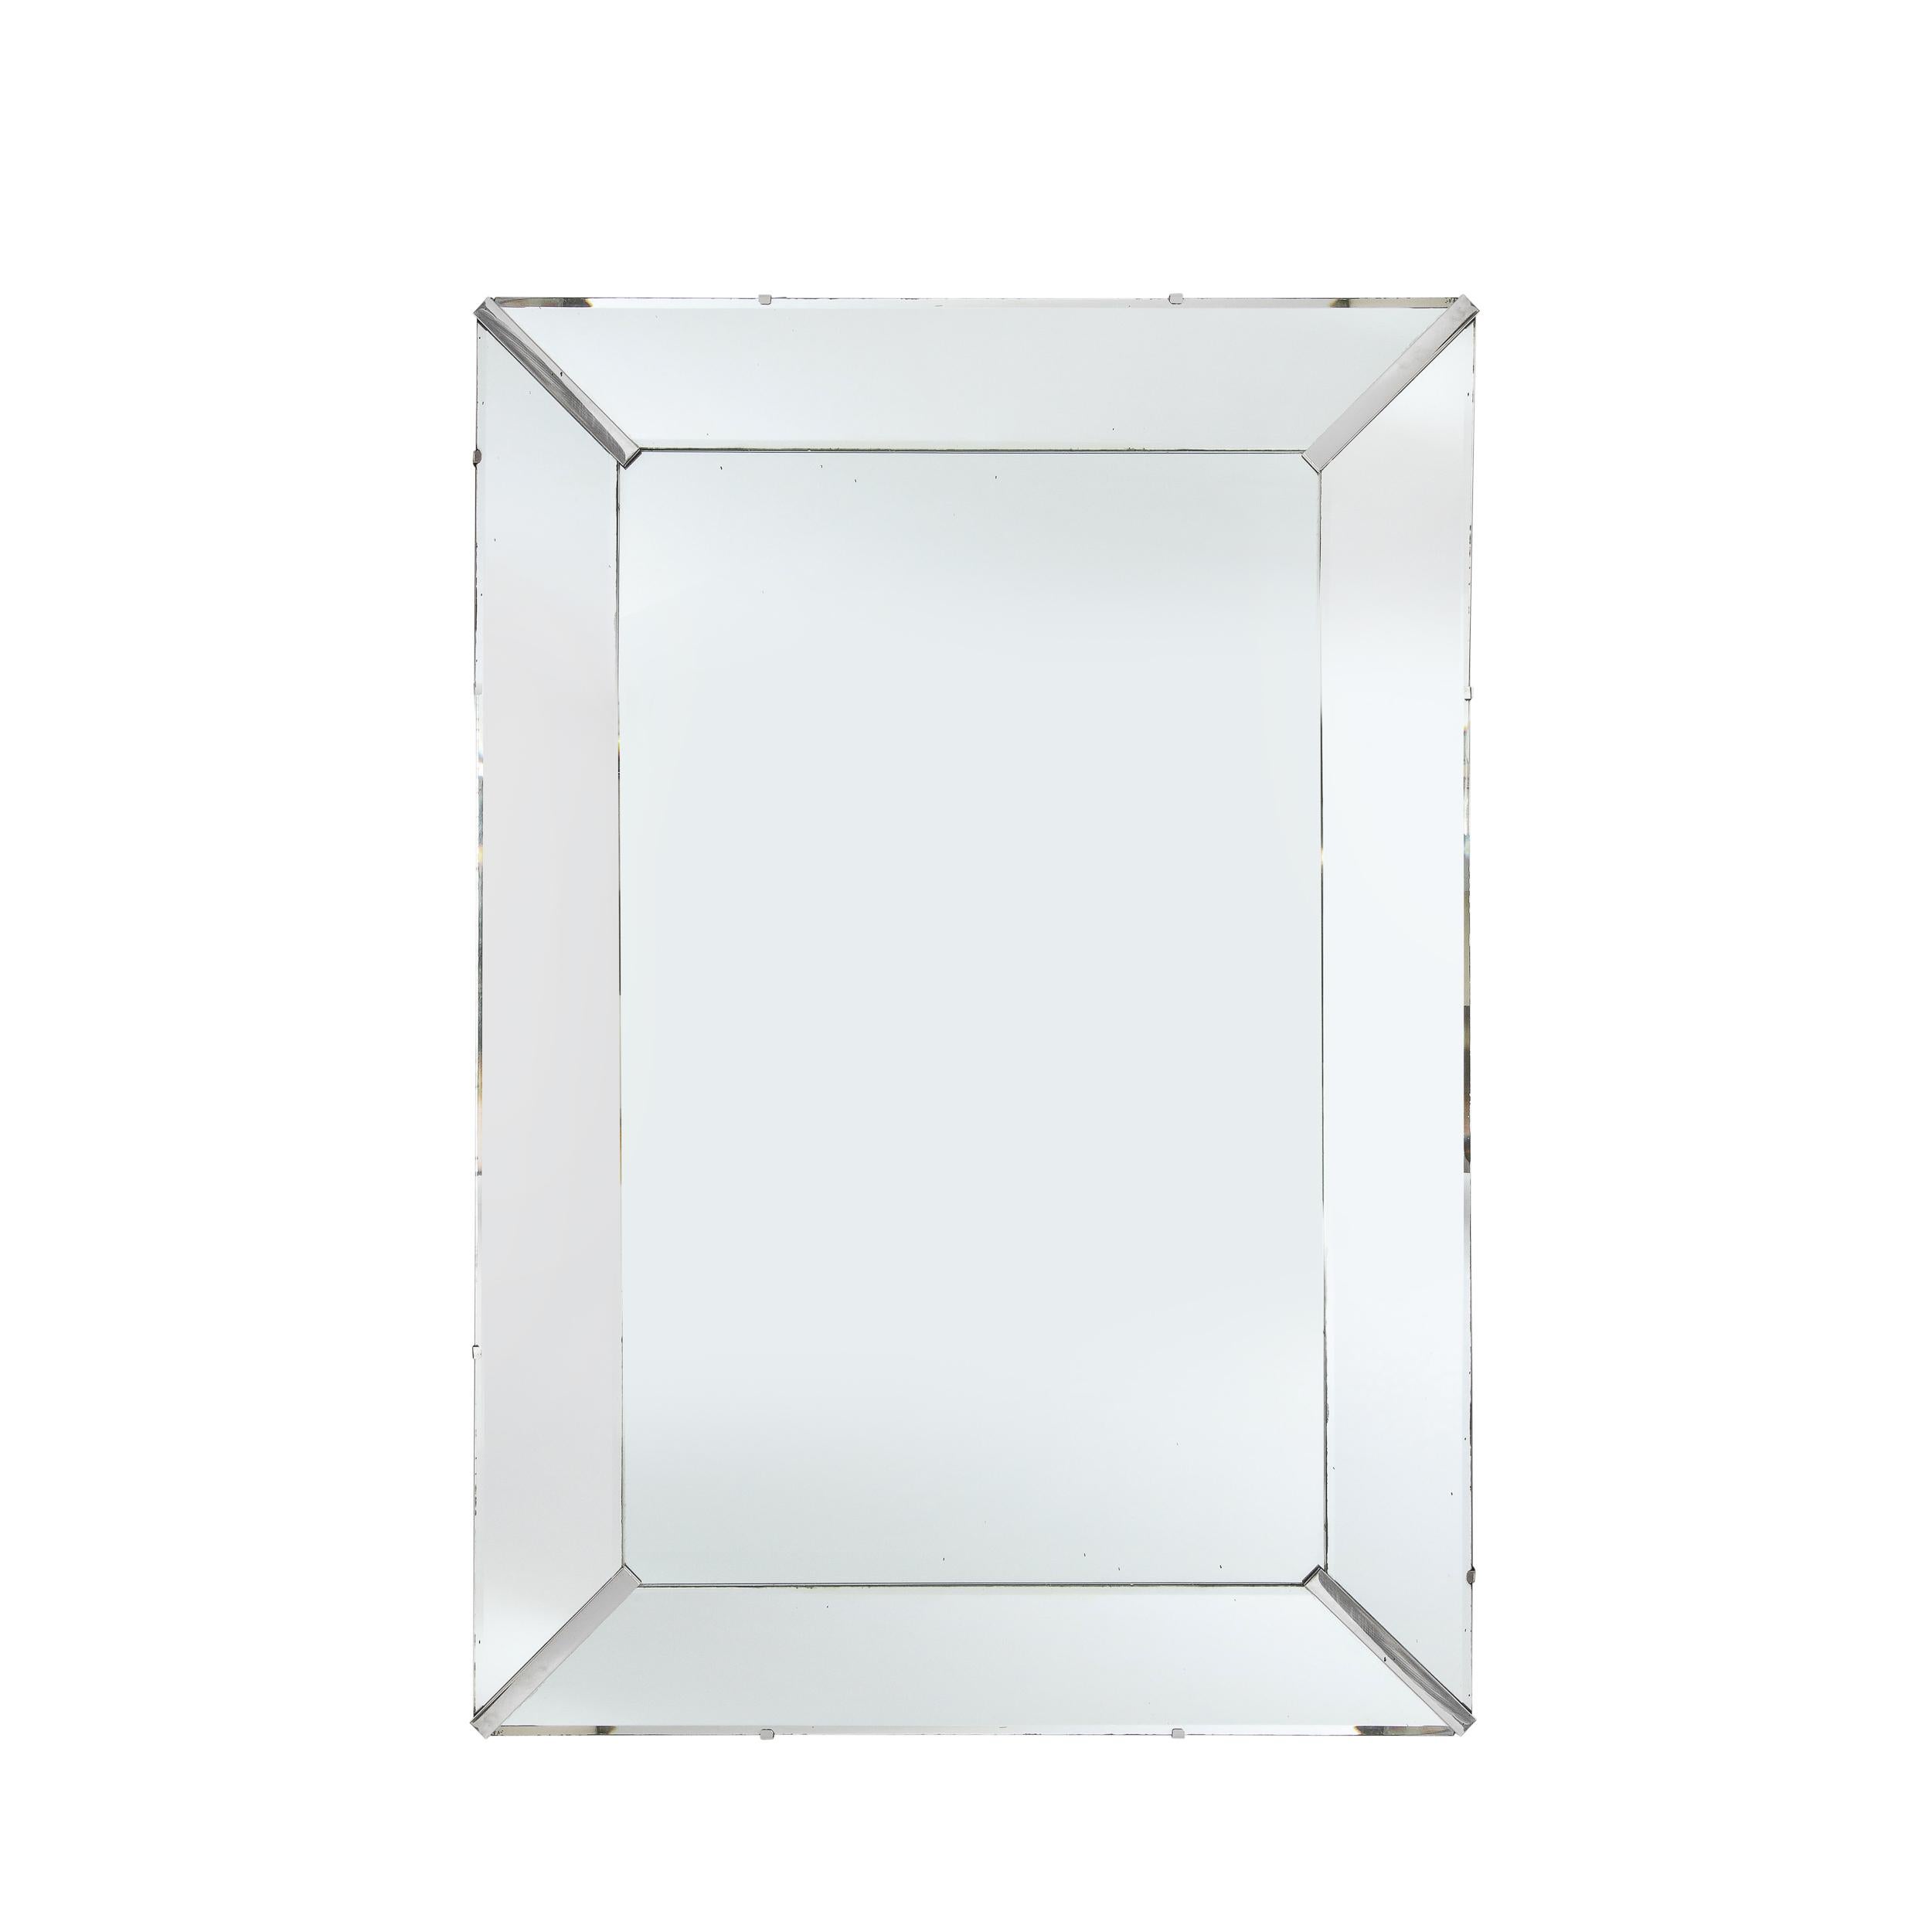 This stunning Mid-Century Modern mirror was realized in the United States, circa 1950. It features a shadowbox form in a rectangular silhouette with beveled plain mirror segments secured in the corner with chrome inserts. With its austere form and